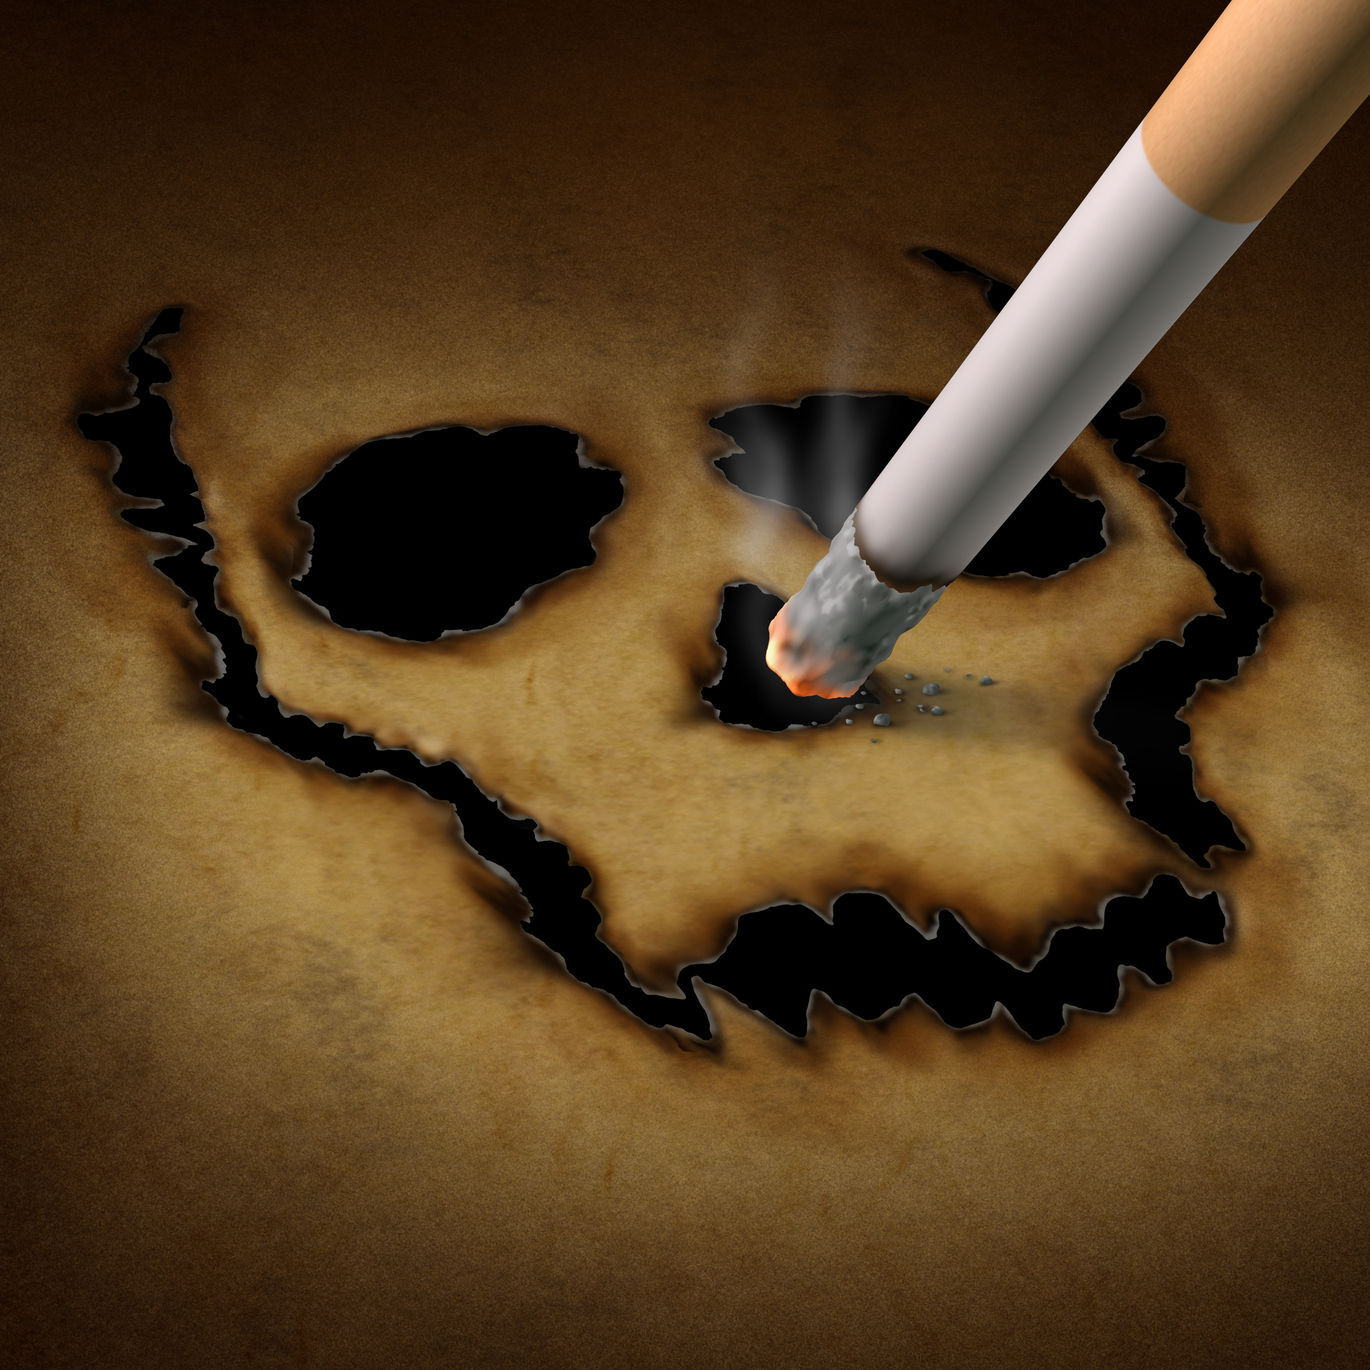 Electronic cigarettes may be more dangerous than traditional smoking